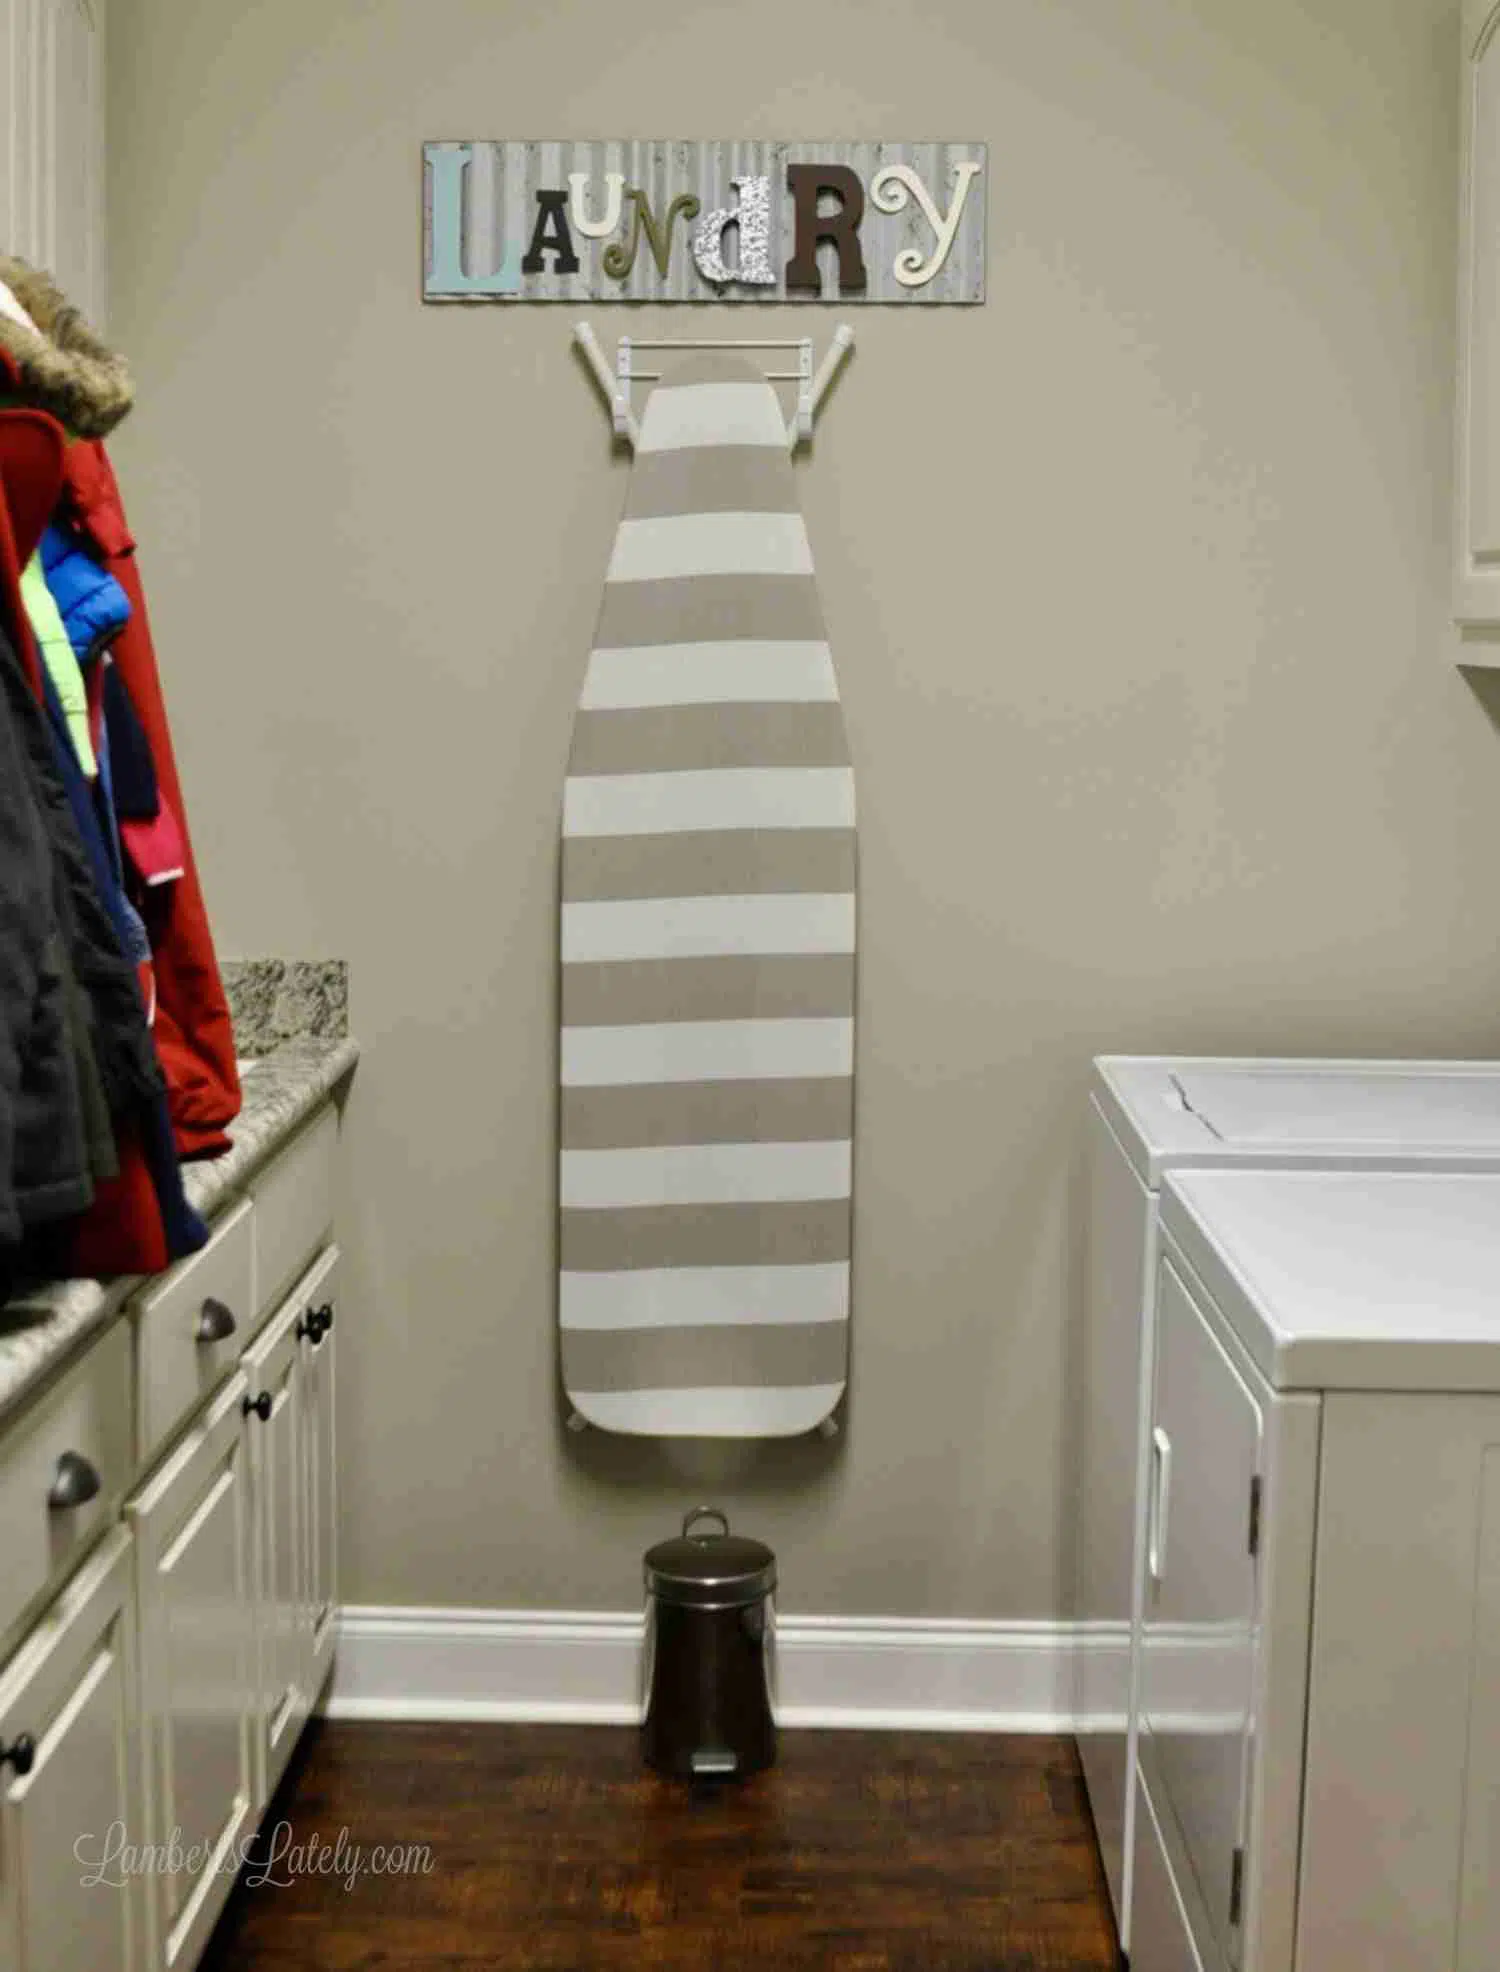 ironing board hanging in a laundry room.